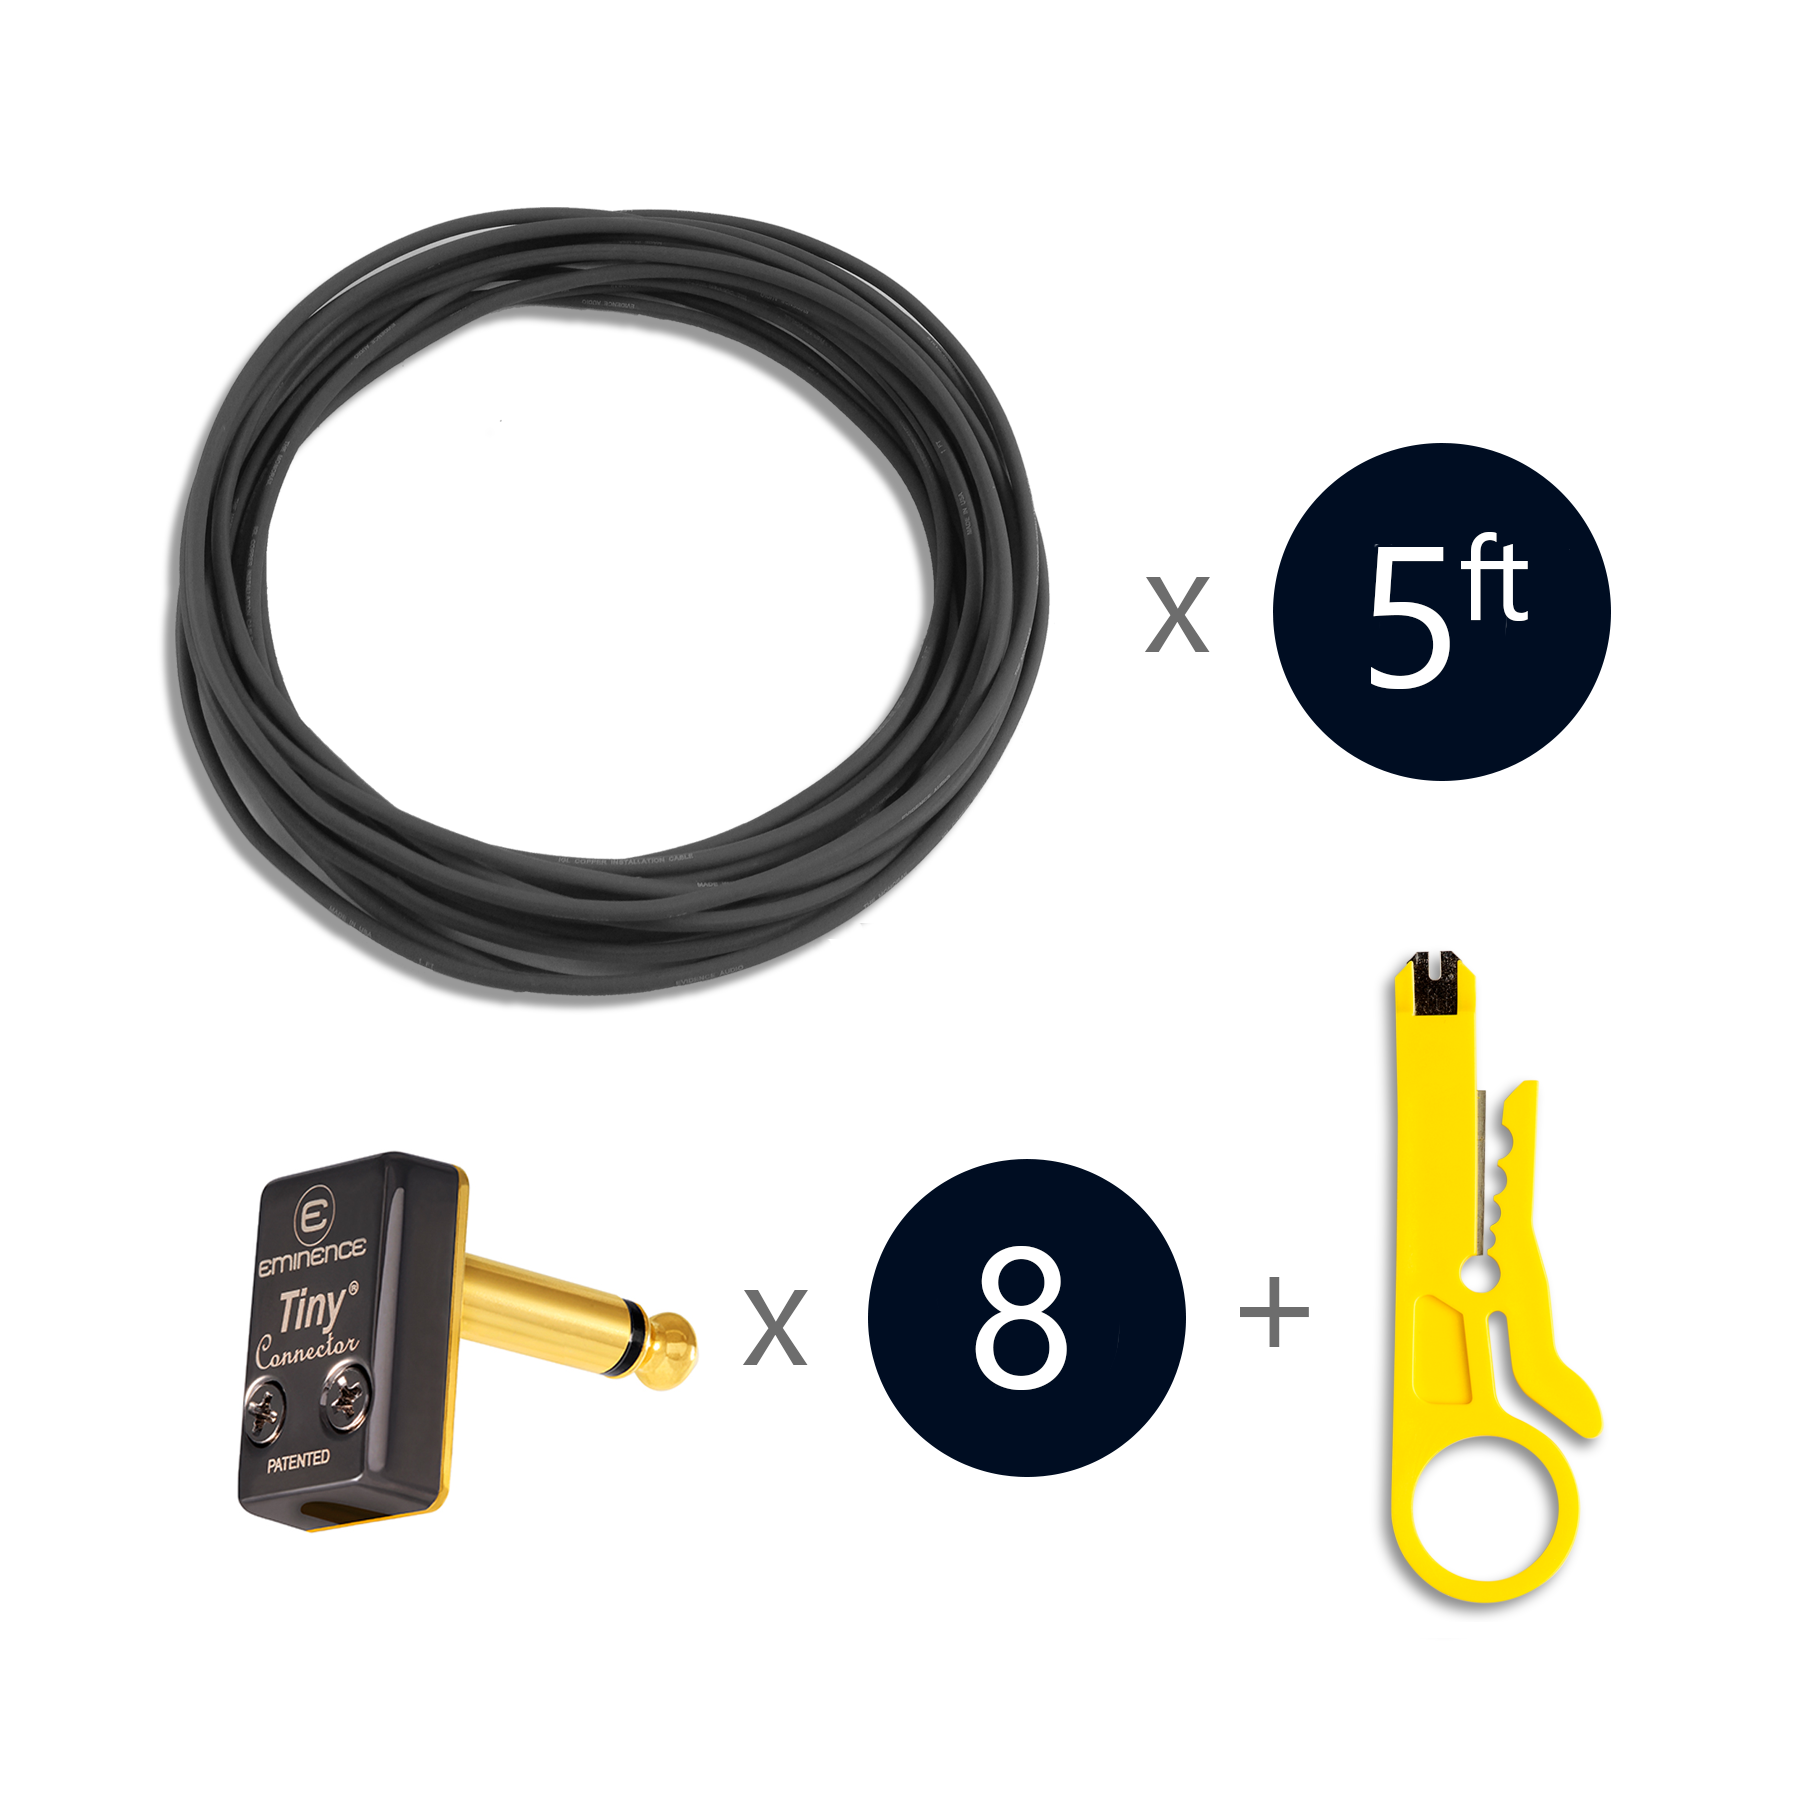 5 ft Evidence Audio Monorail cable + 8 x Eminence Tiny connector Plug + cable cutter tool